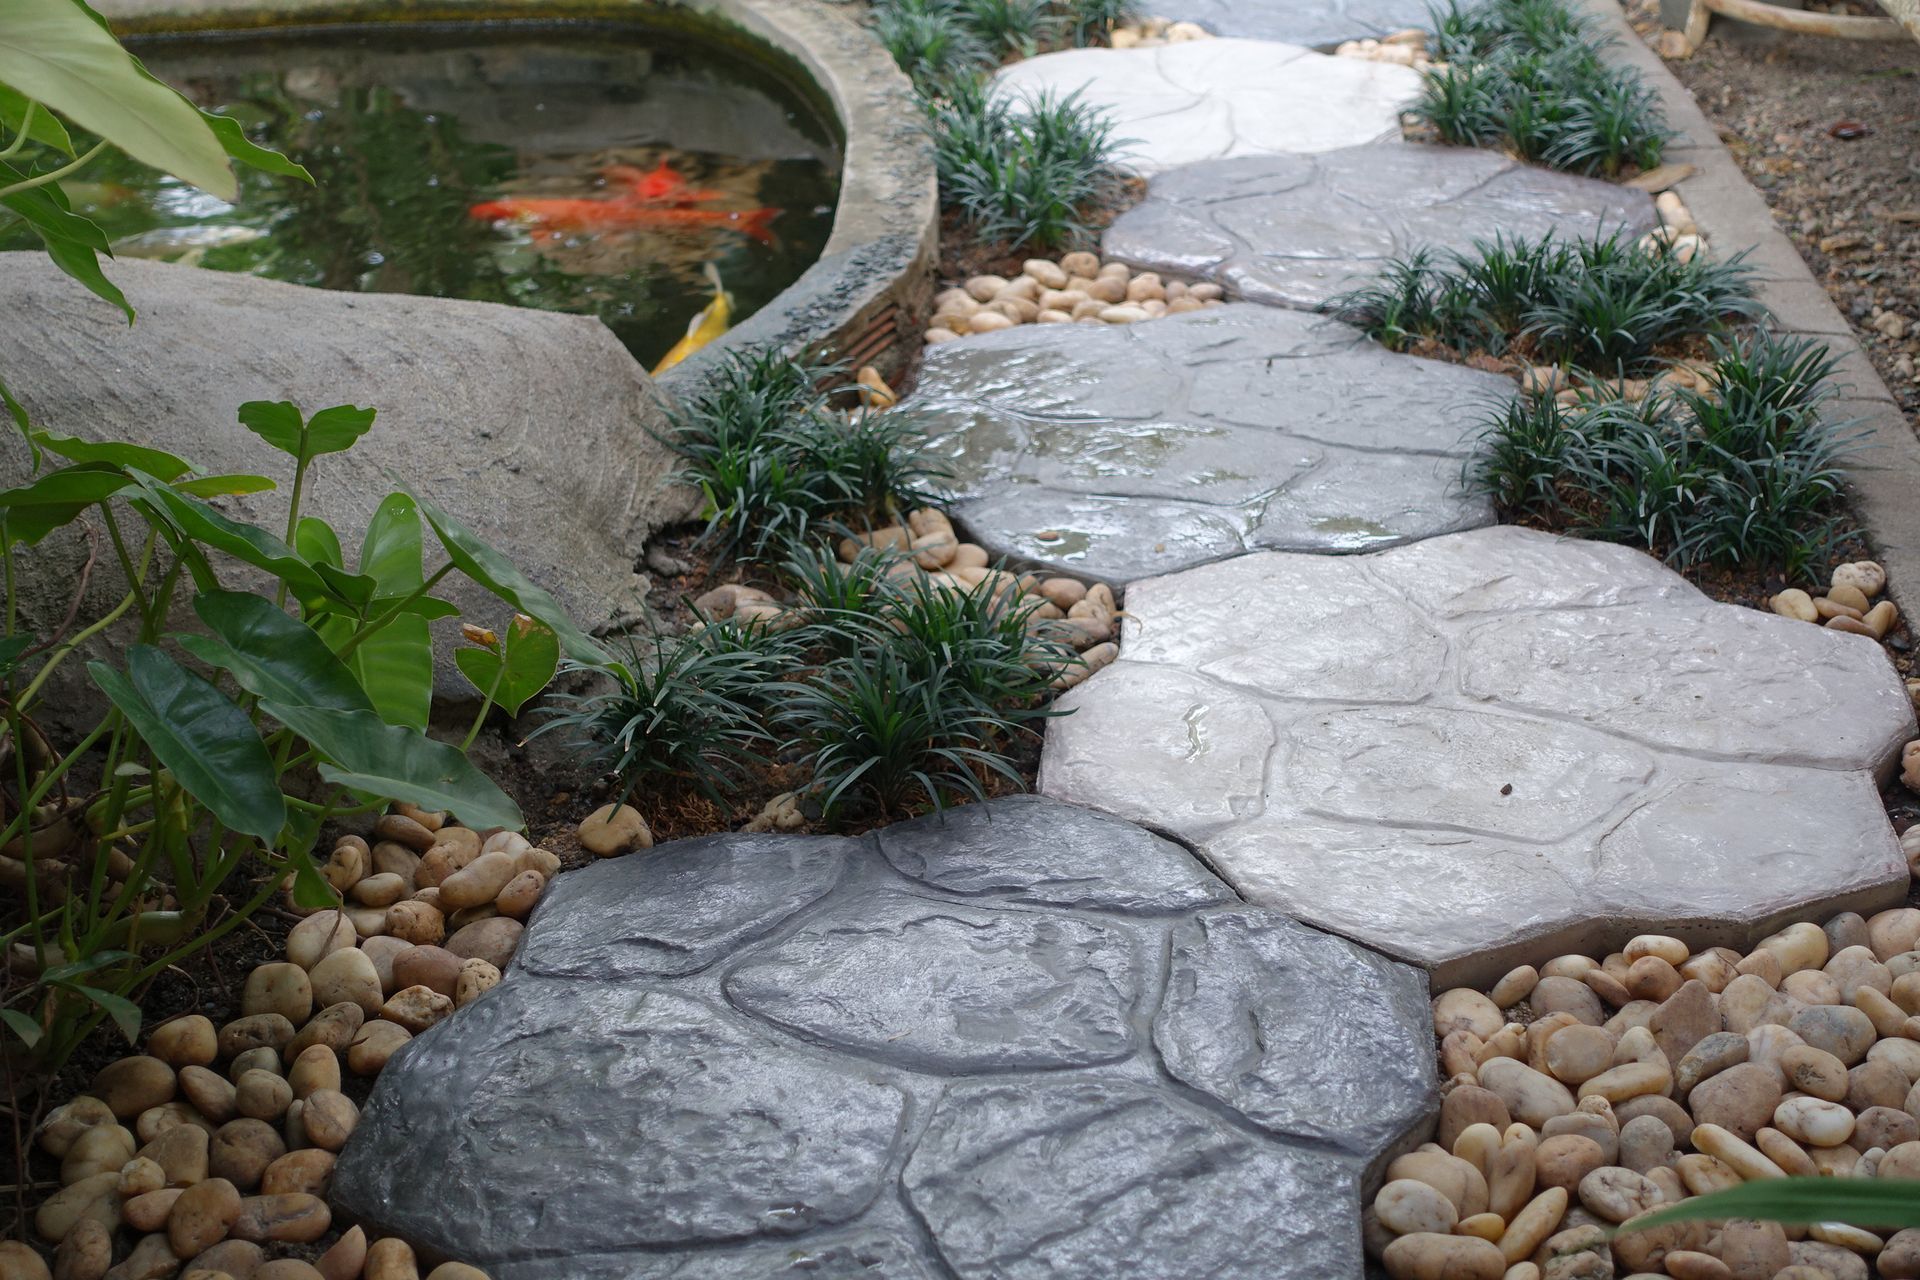 a stone walkway leading to a pond with fish in it